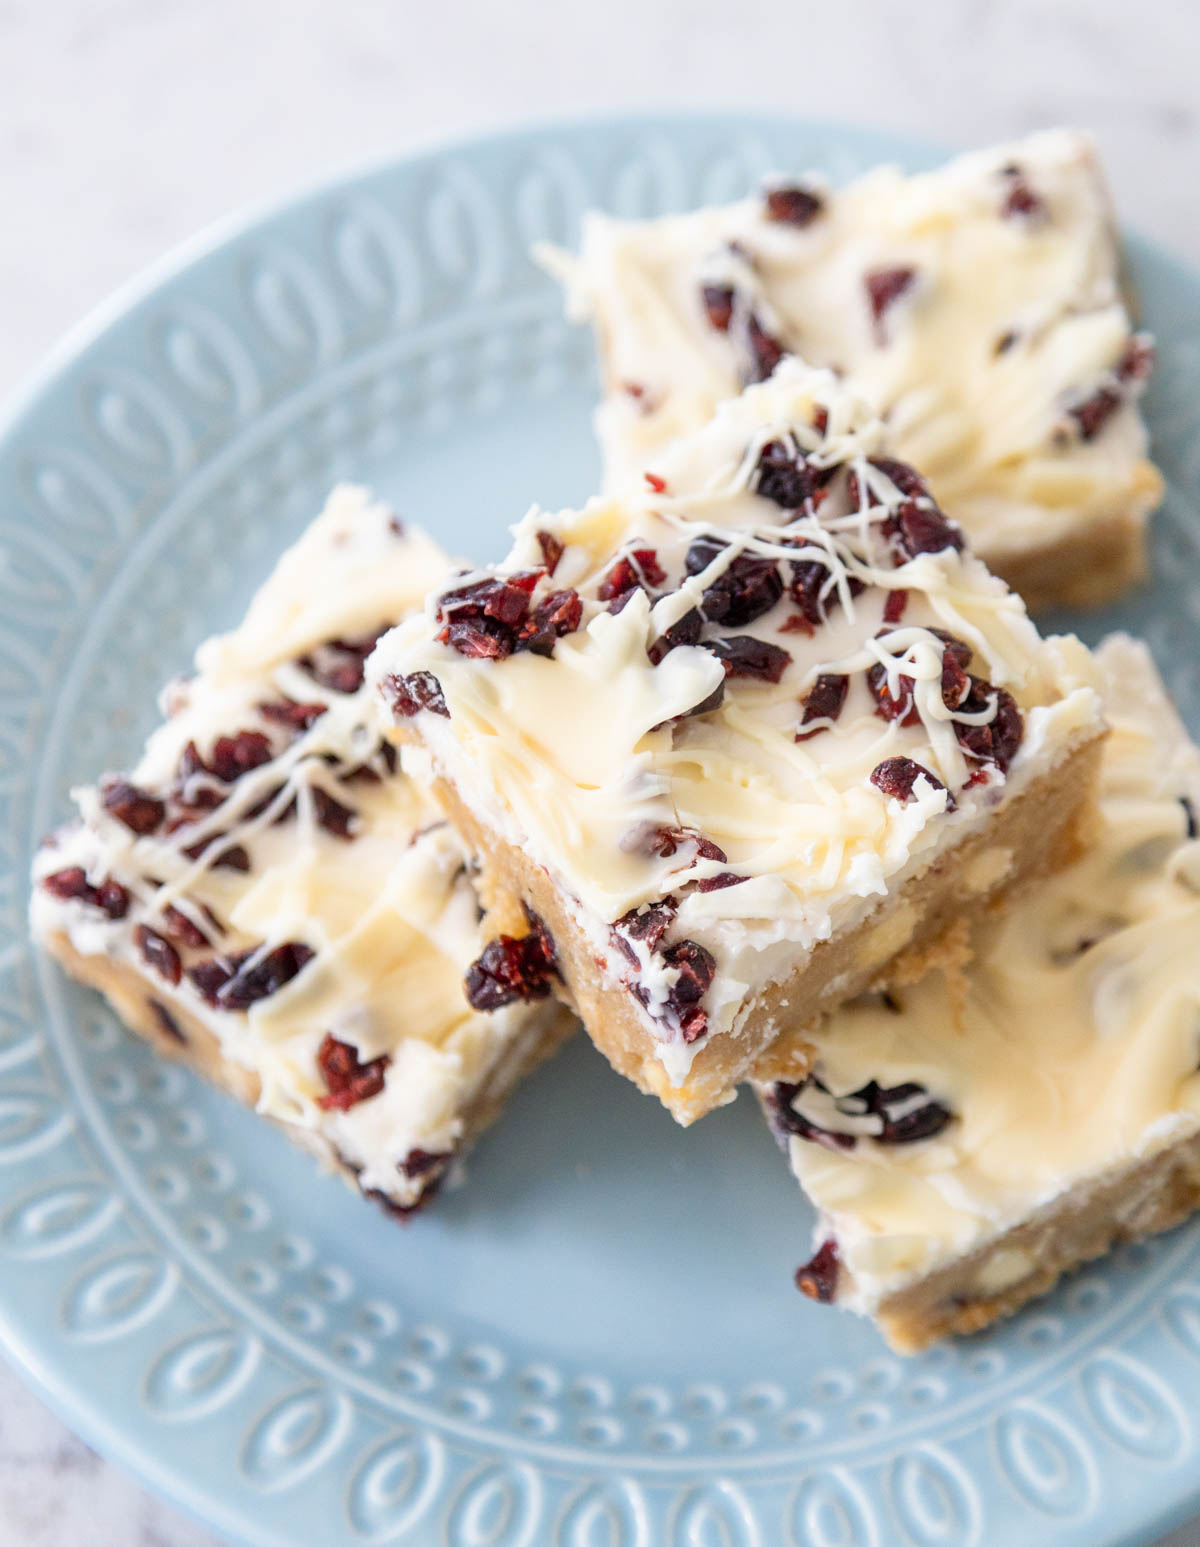 A blue plate has several cranberry bliss bars ready to serve, you can see the white chocolate drizzle on the tops.